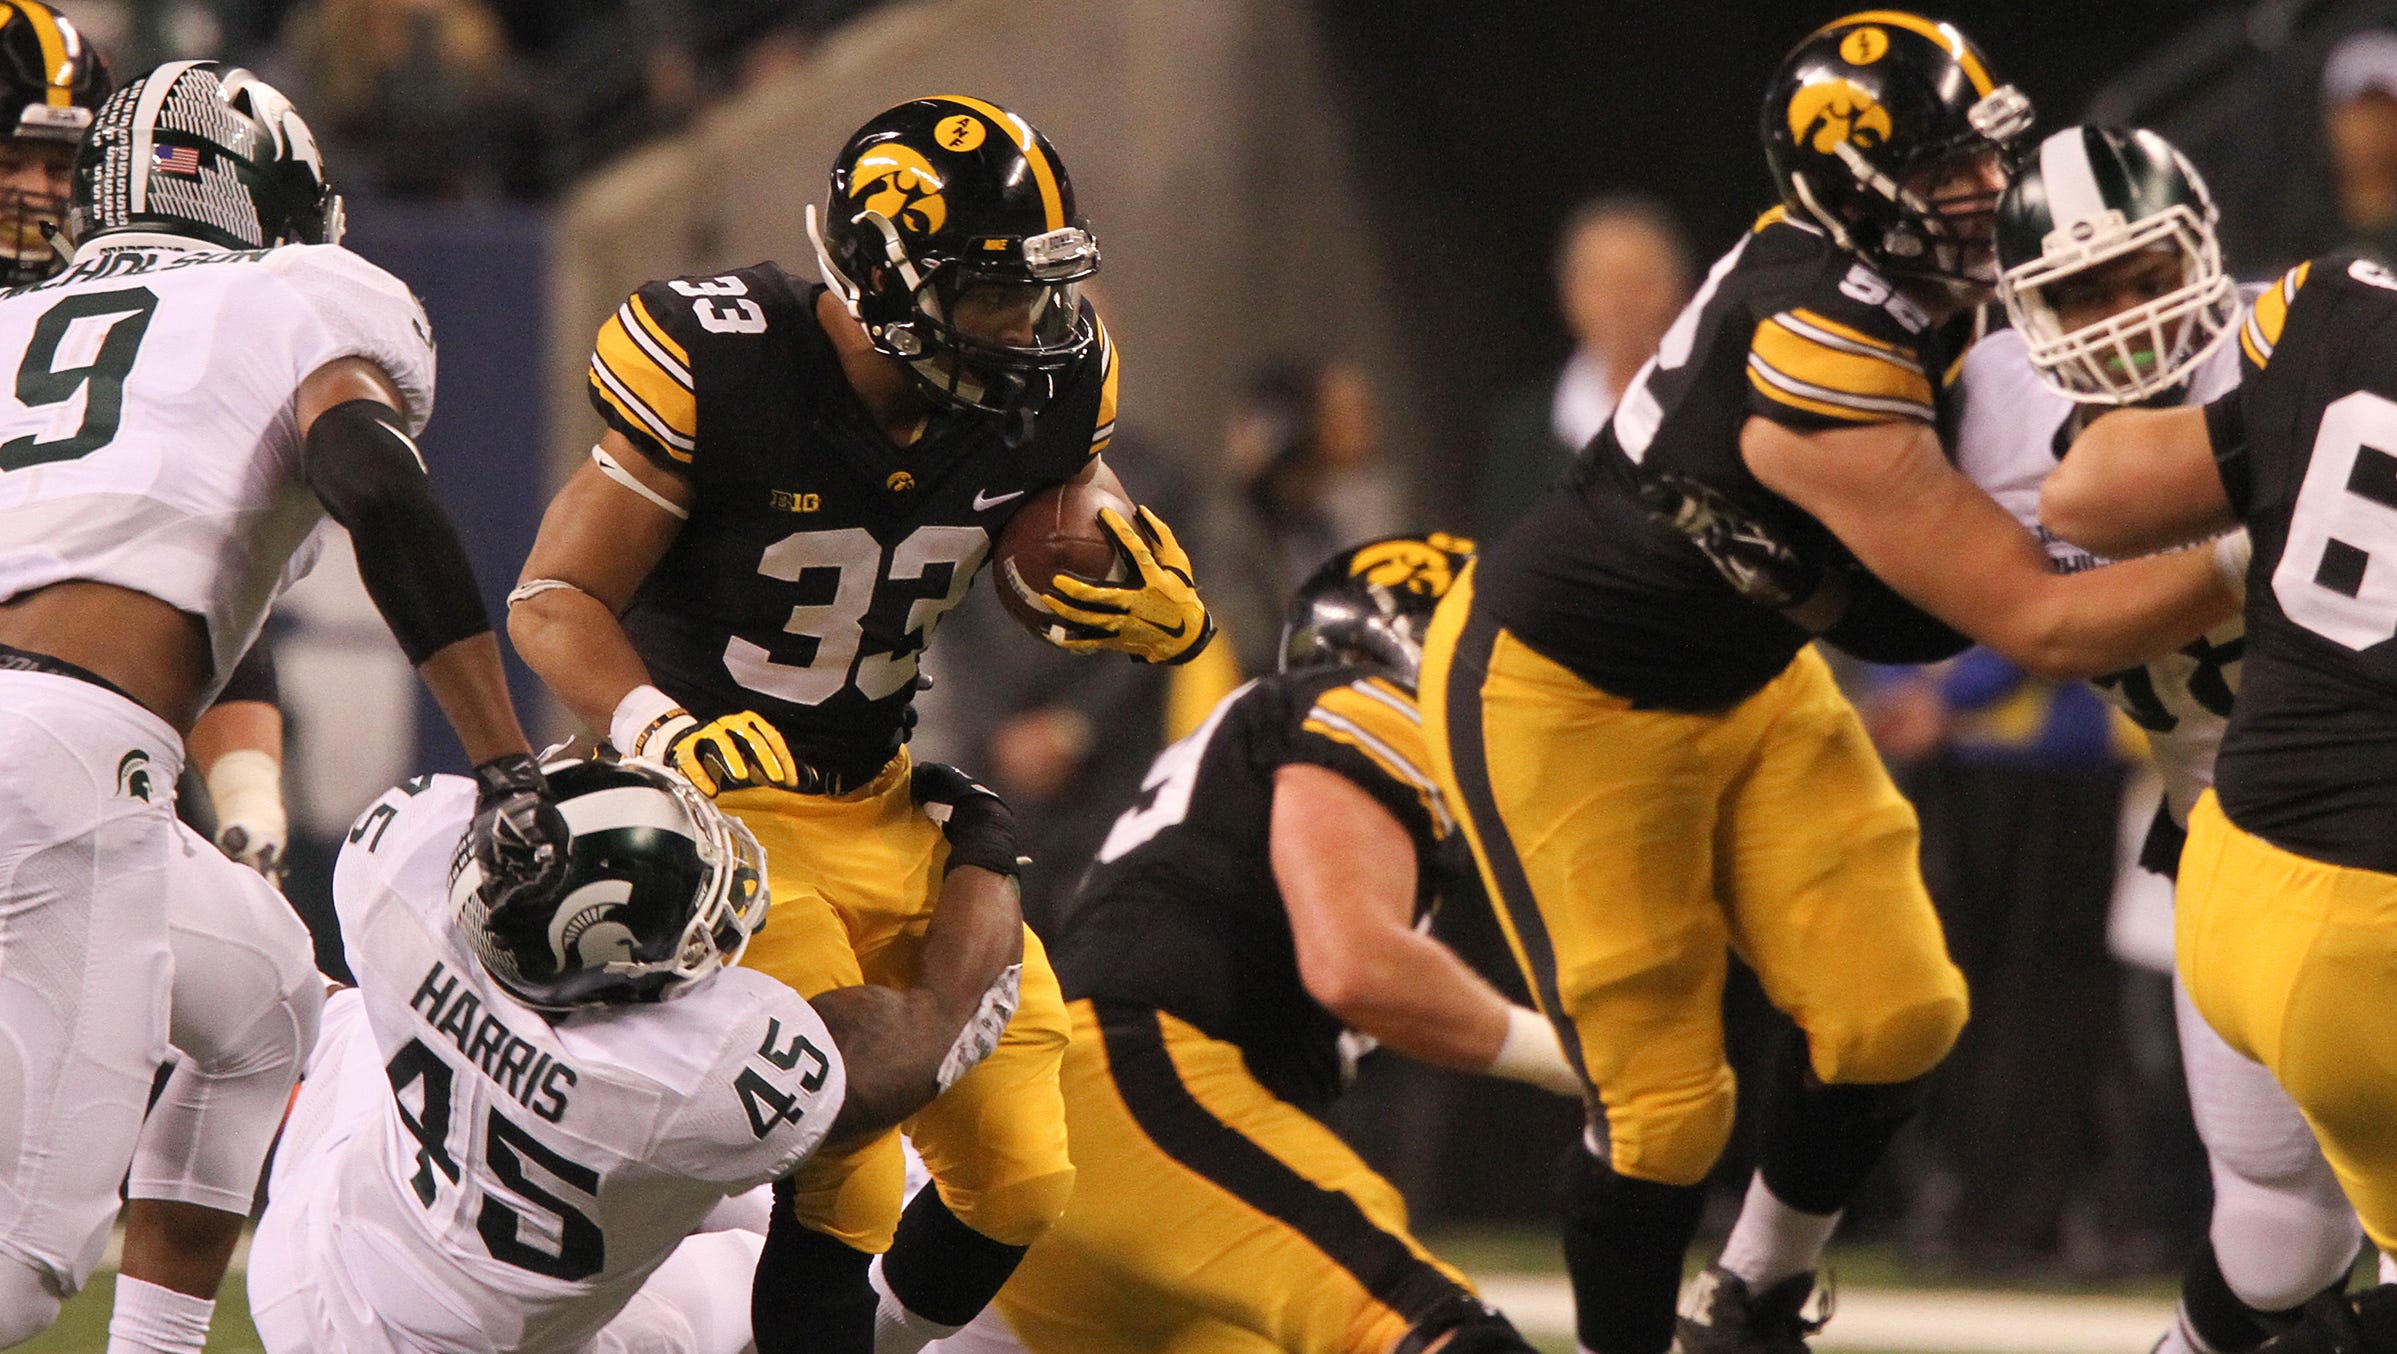 Iowa running back Jordan Canzeri runs down field during the Hawkeyes' Big Ten Championship game against Michigan State at Lucas Oil Stadium in Indianapolis, Ind. on Saturday, Dec. 5, 2015.